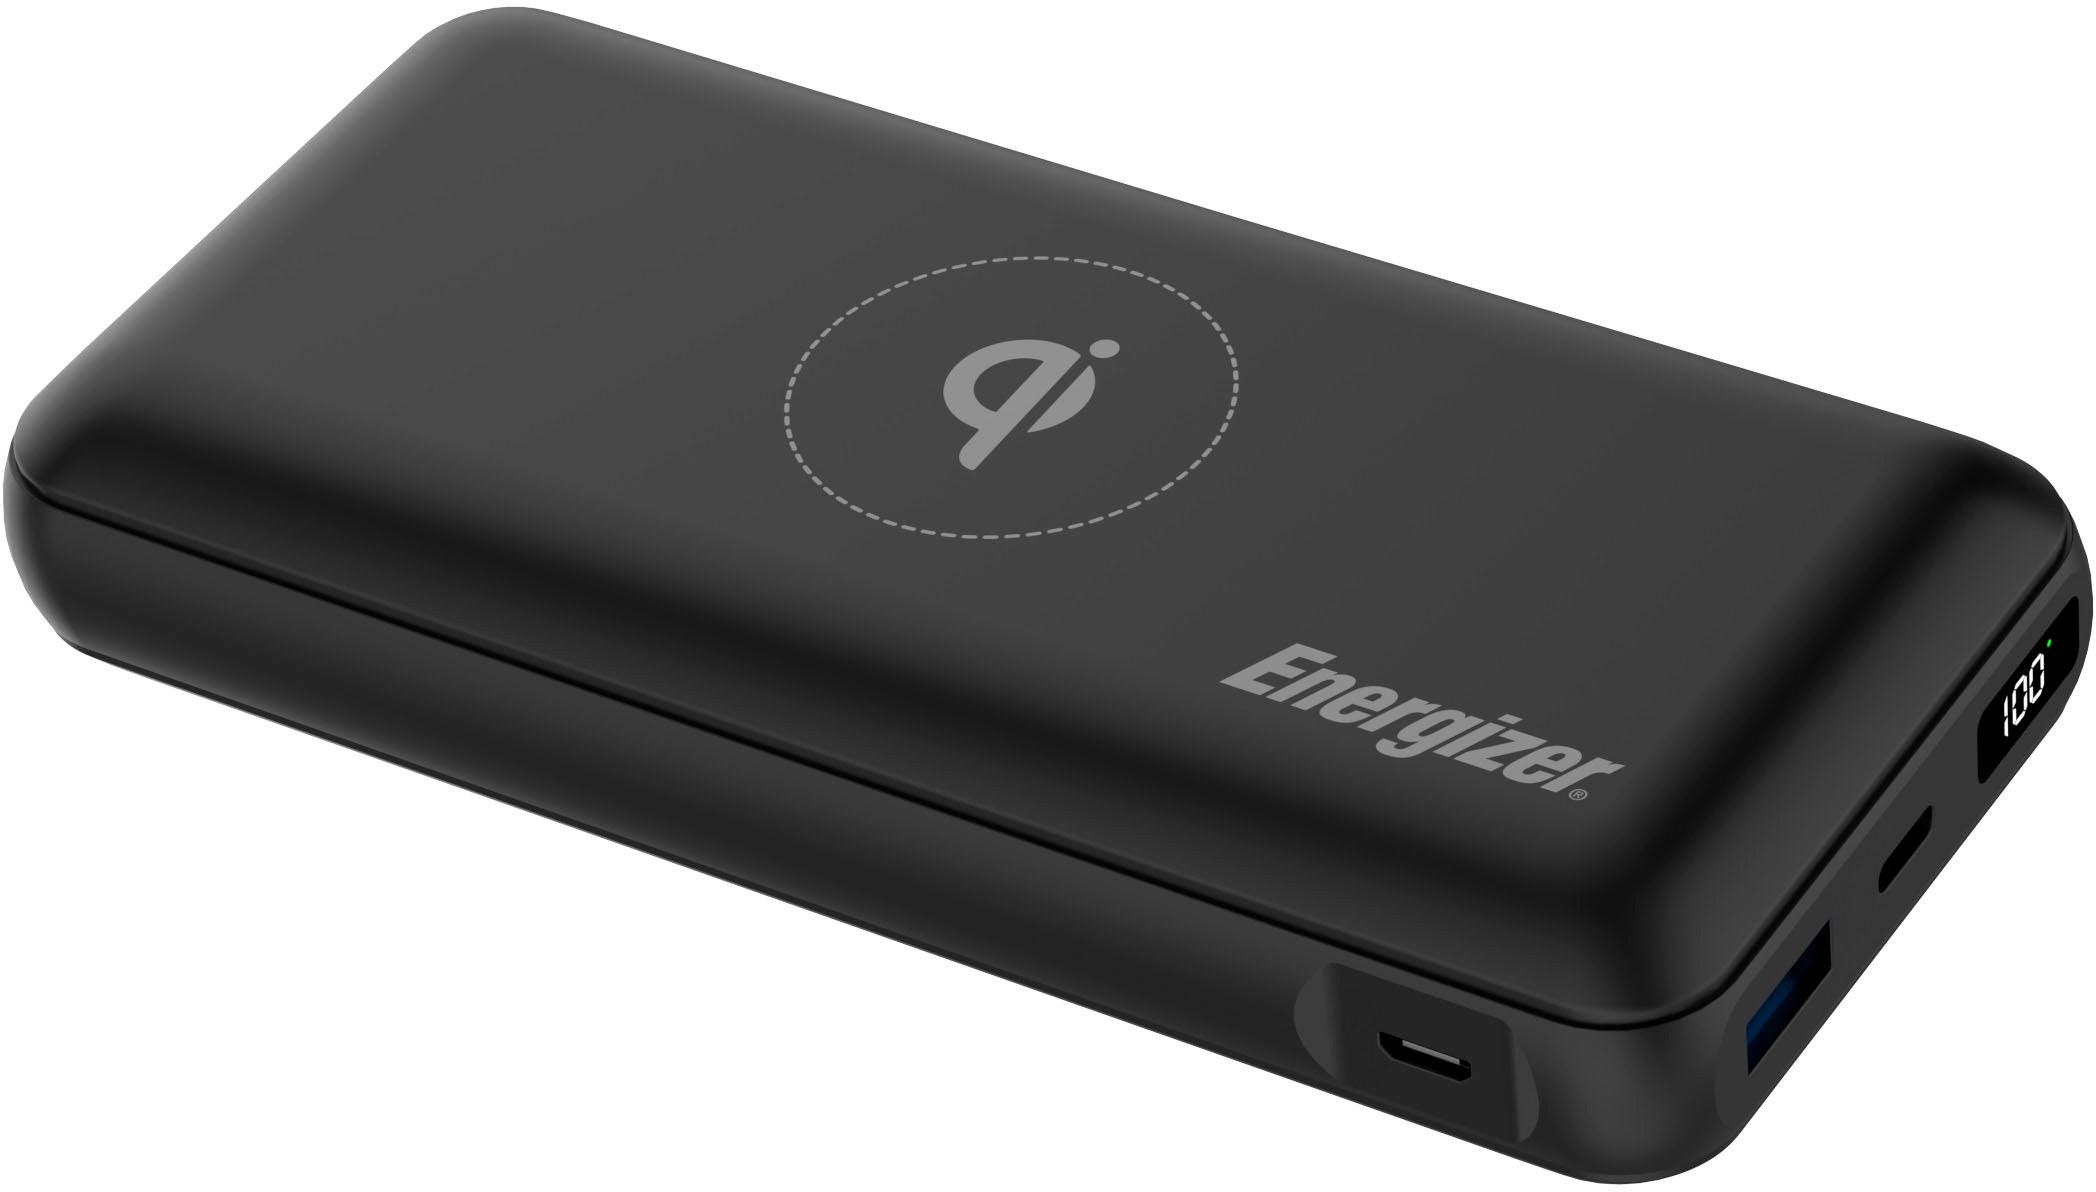 Energizer 20,000mAh Power Bank with USB-C Power Delivery (PD) and